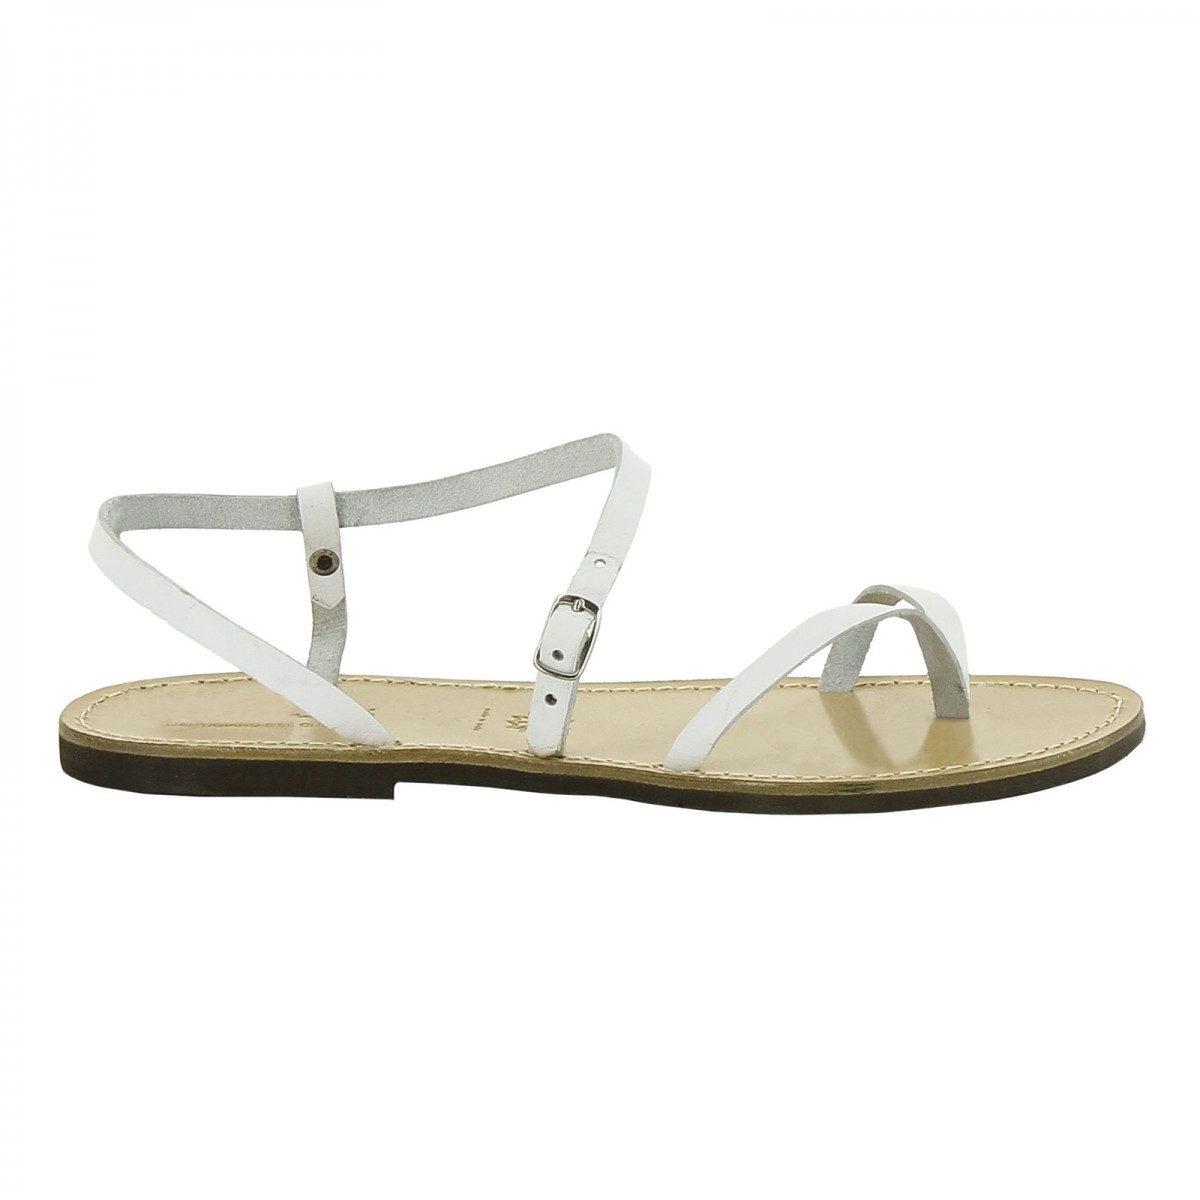 White leather thong sandals for women Handmade in Italy | The leather ...